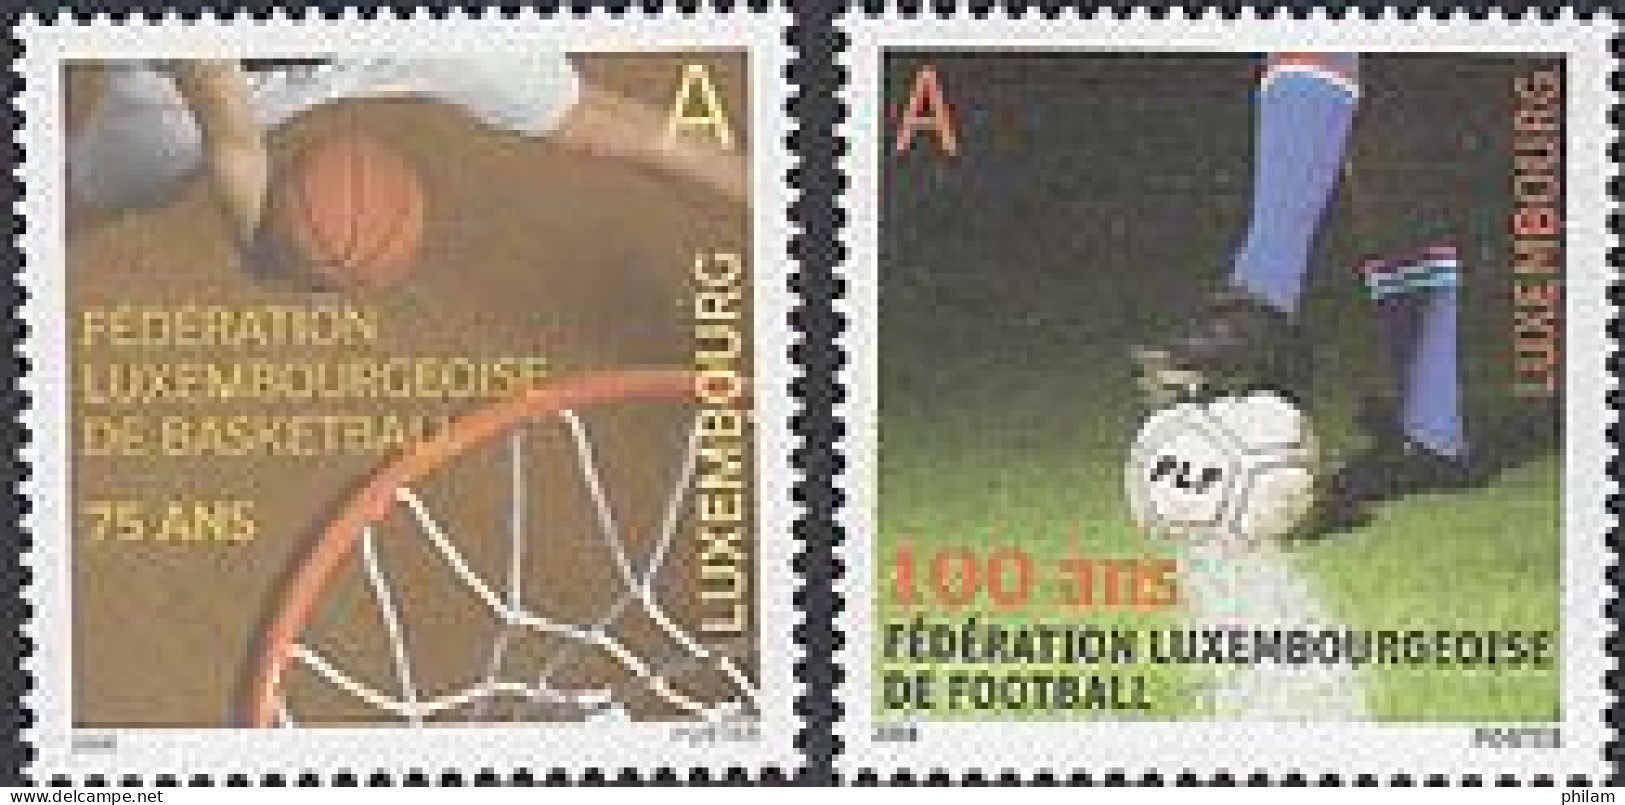 LUXEMBOURG 2008 - Sports: Football Et Basket-ball - 2 V. - Nuevos